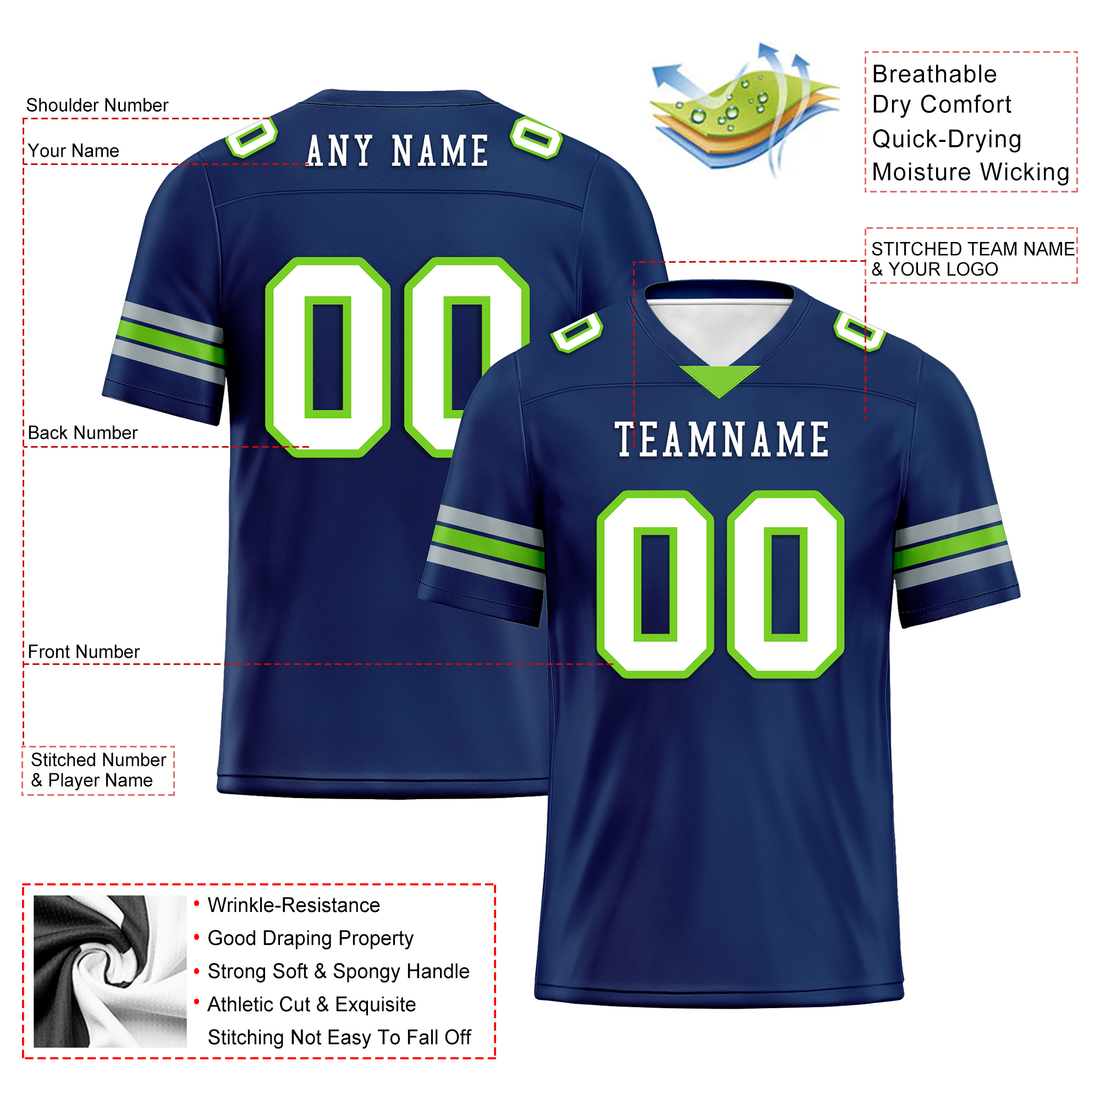 Custom Blue Classic Style Personalized Authentic Football Jersey FBJ02-bd0a70ad